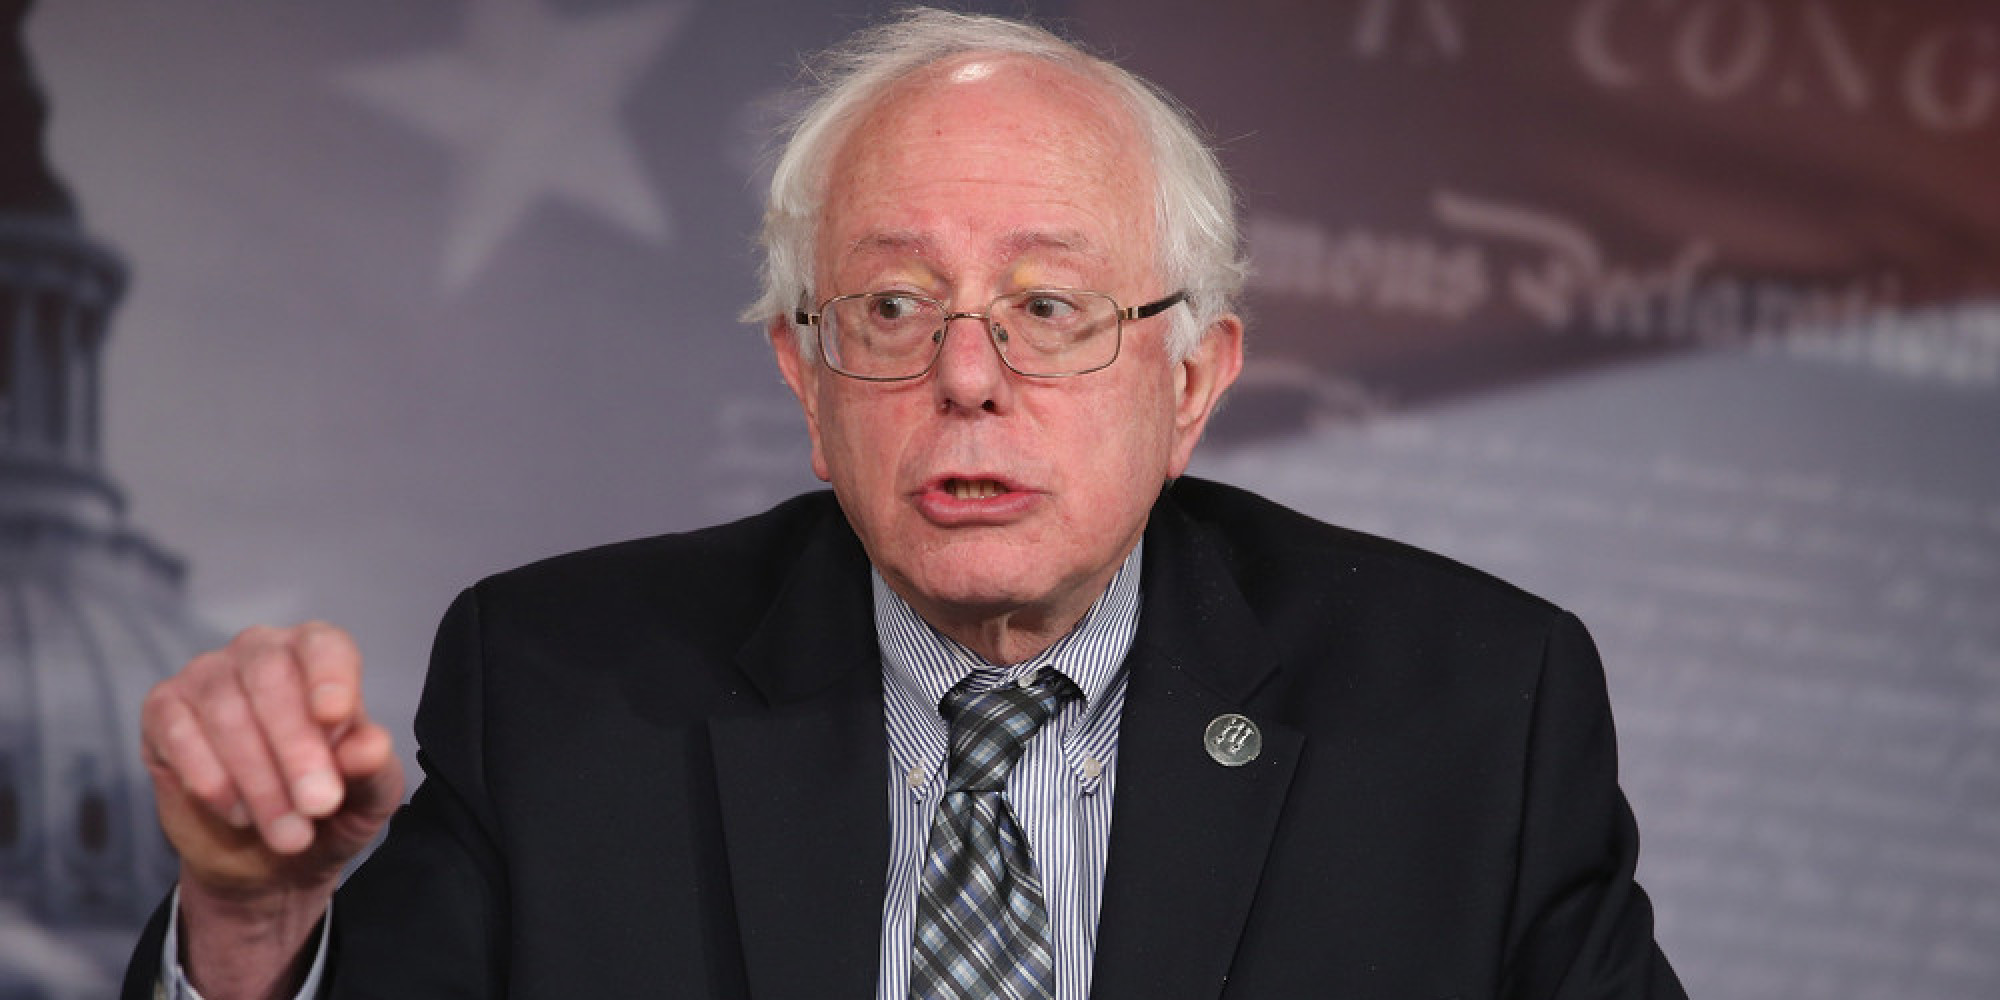 BERNIE SANDERS: I Would Be A Better President Than Hillary Clinton